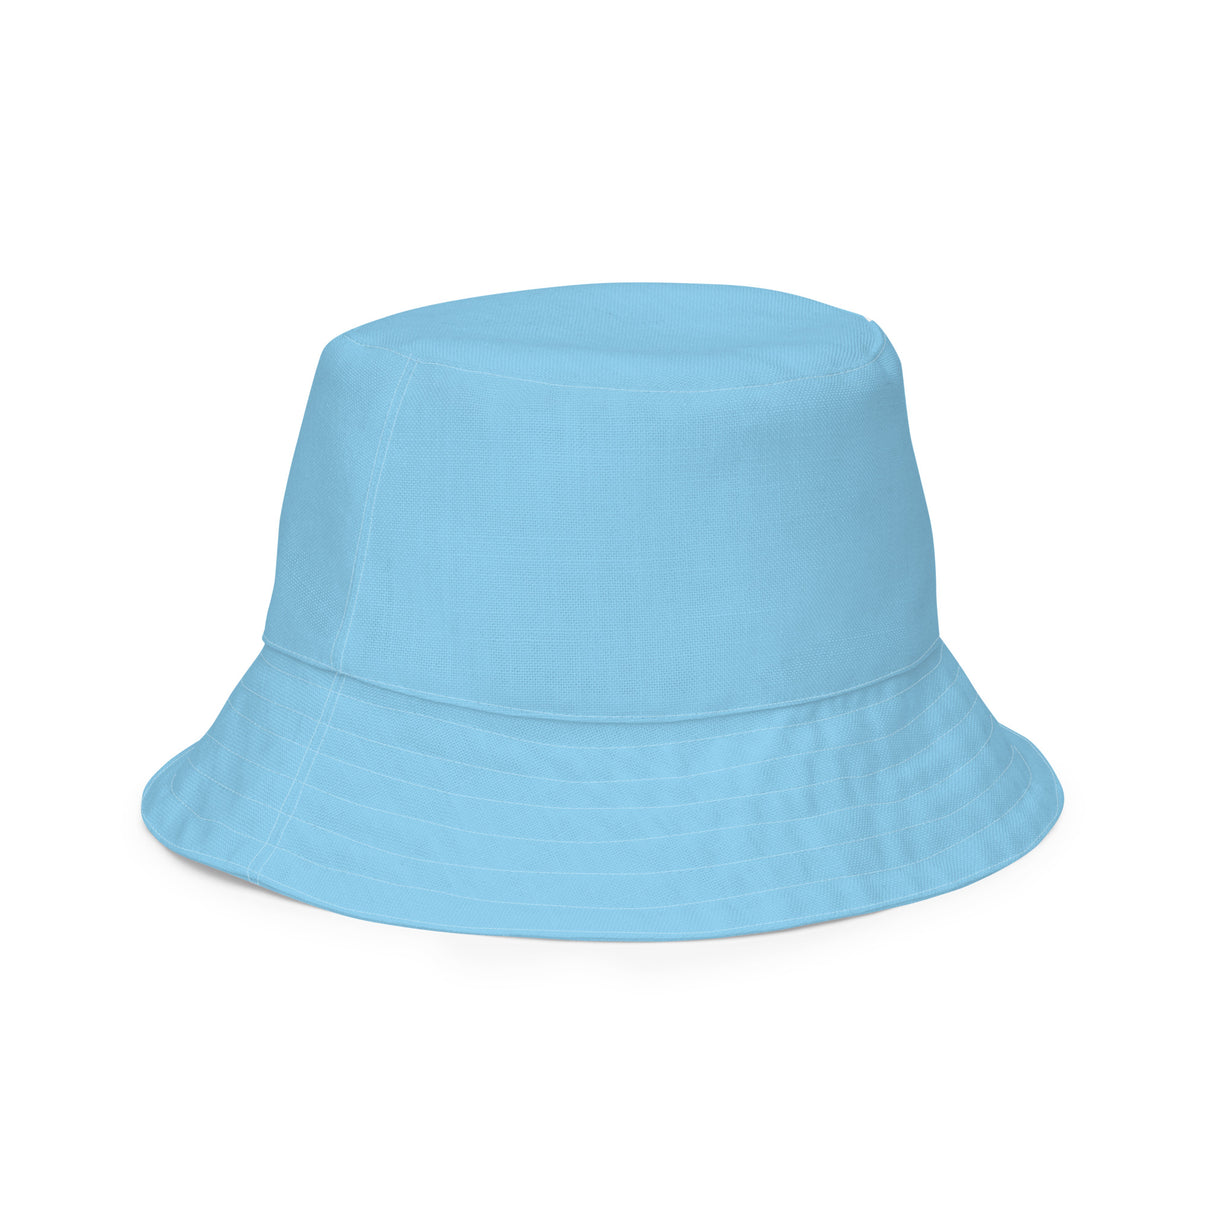 Baby Blue and White Reversible Bucket Hat, Nautical Summer Hat, Boatin ...